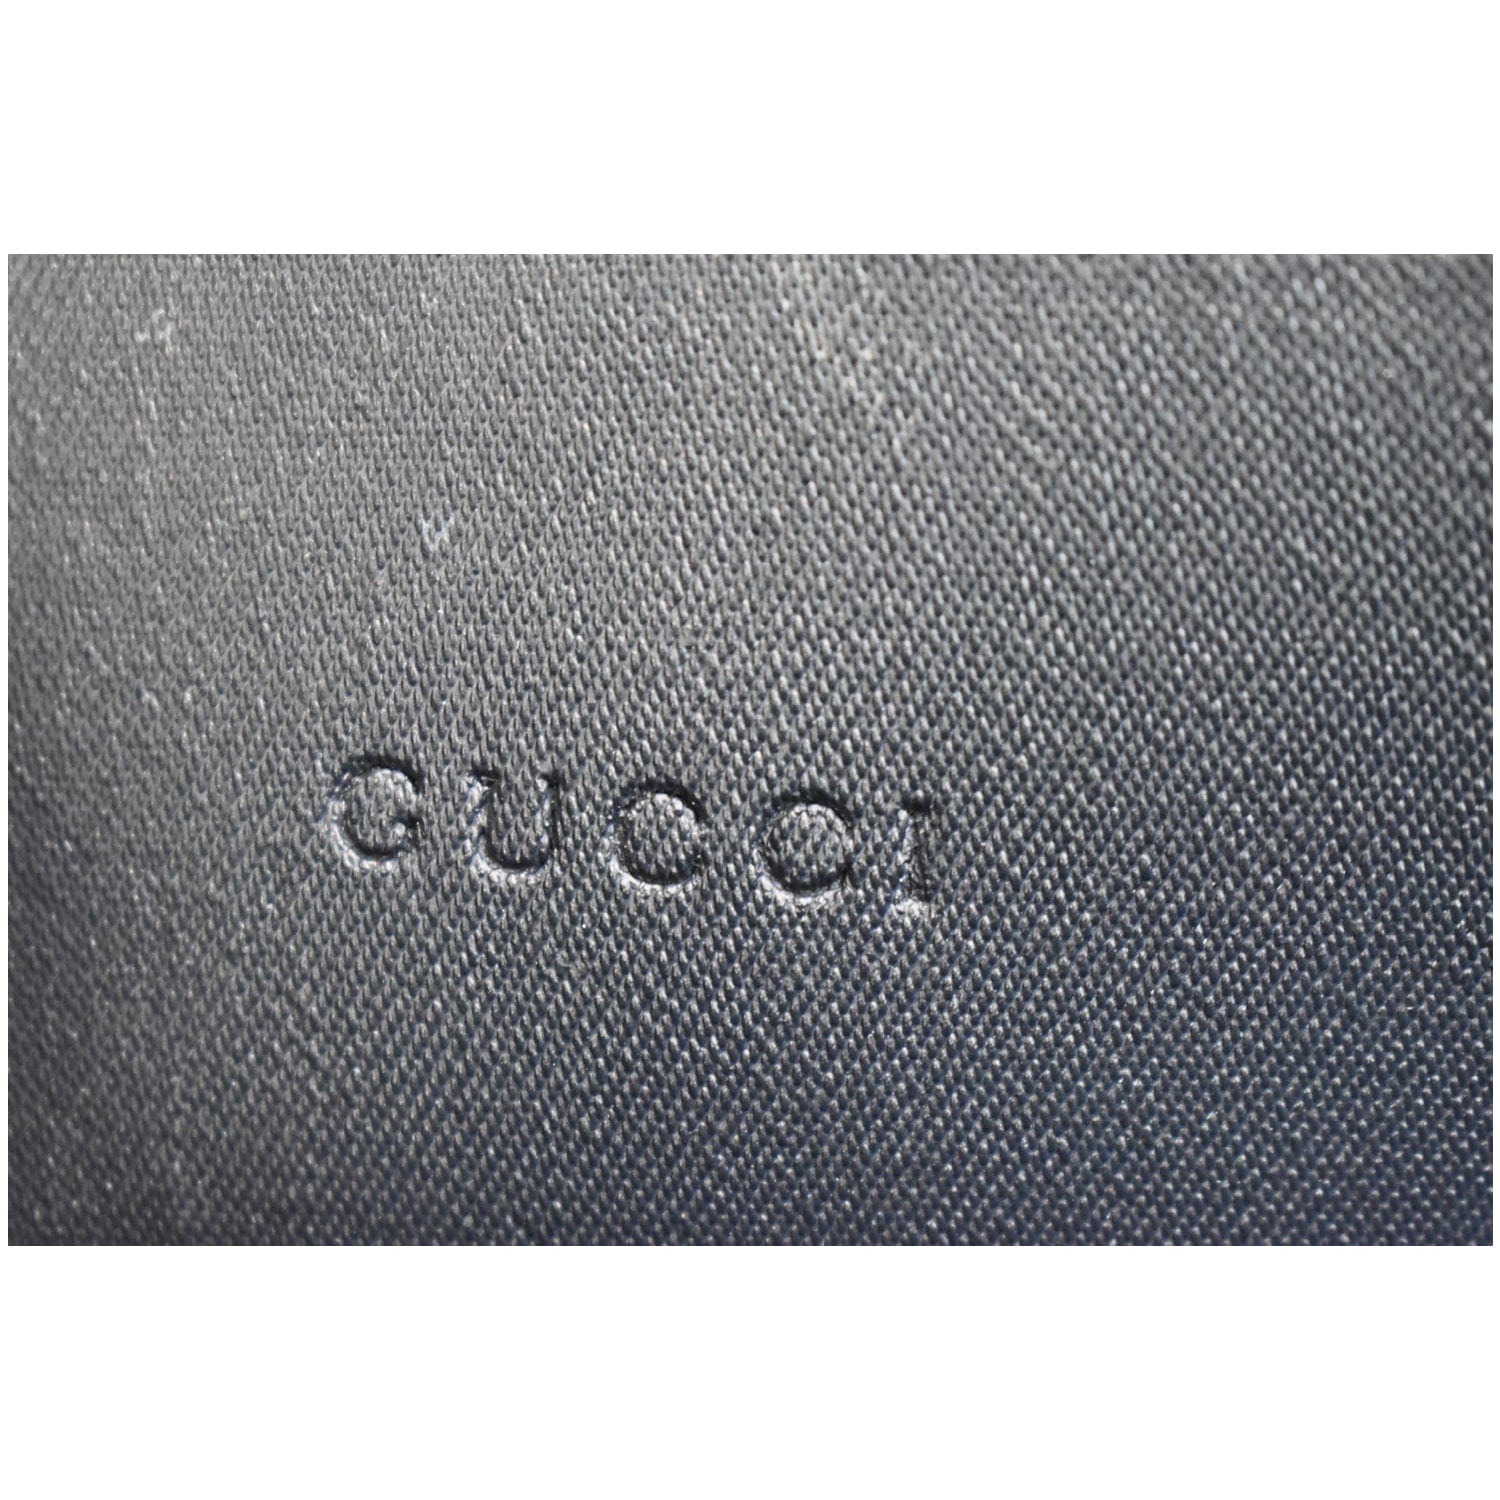 Gucci Blue Blooms Large Tablet Documents Holder - A World Of Goods